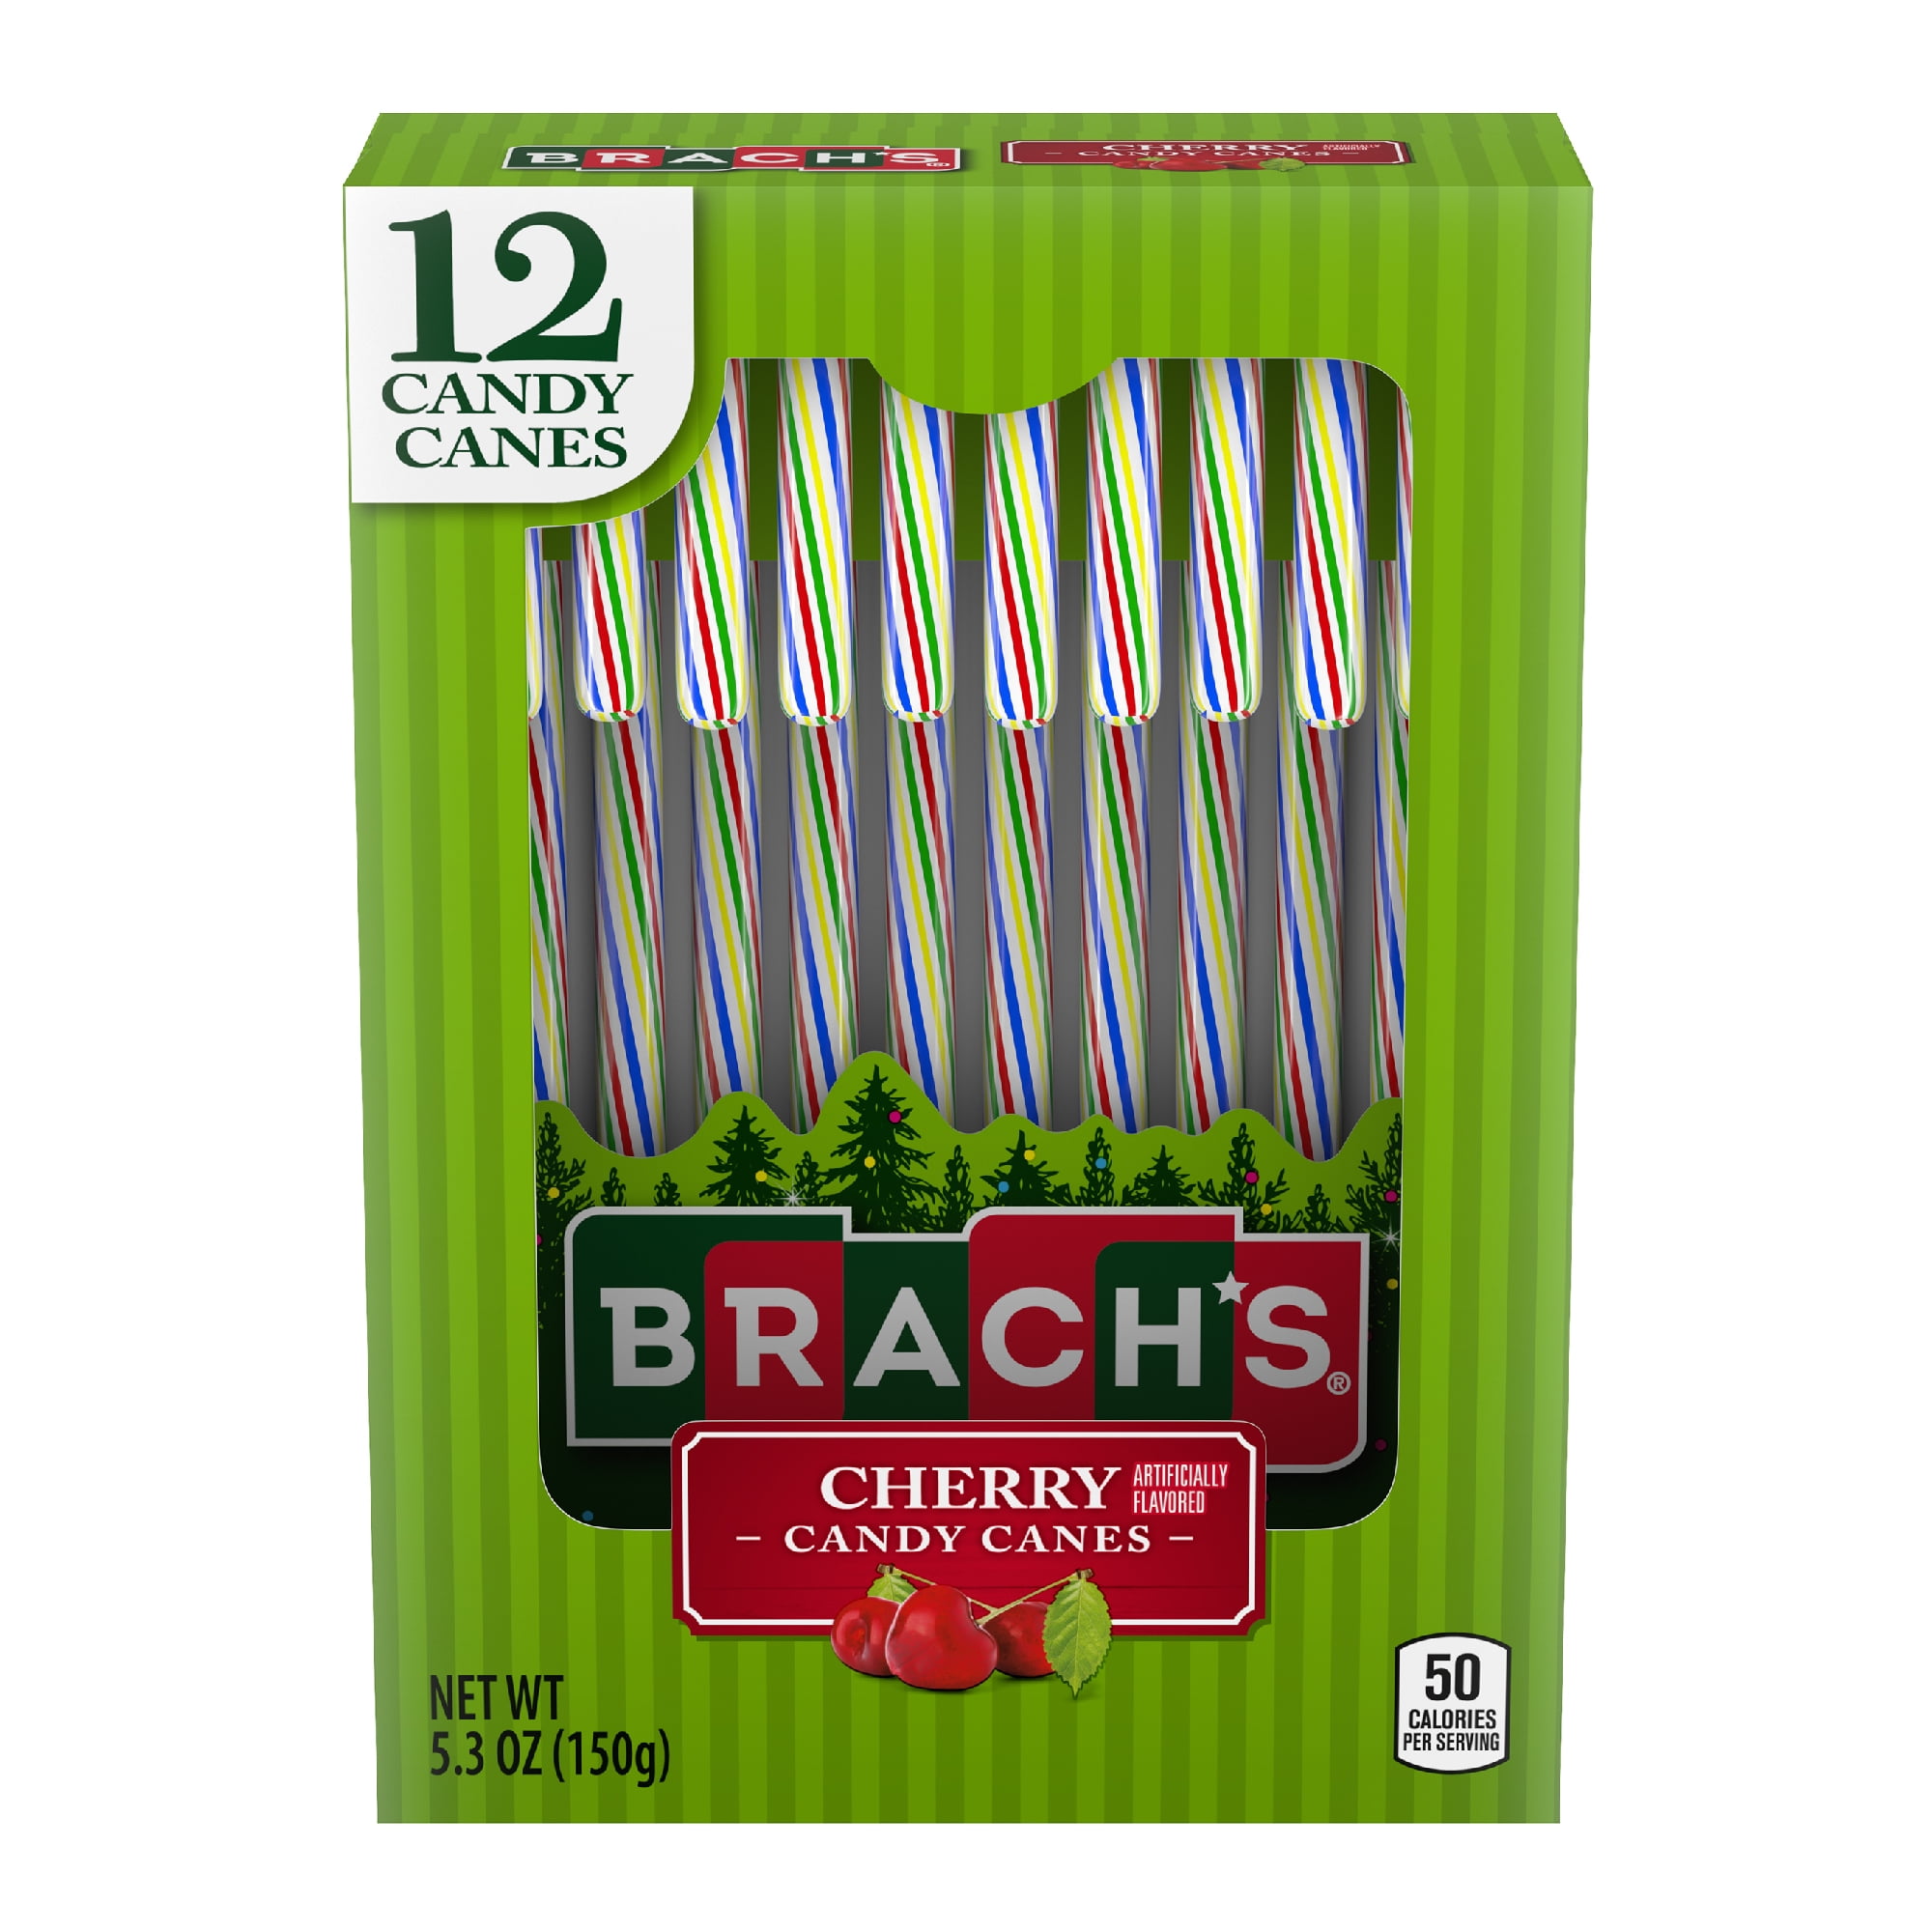 Brach's Holiday Cherry Candy Canes, 12ct Box